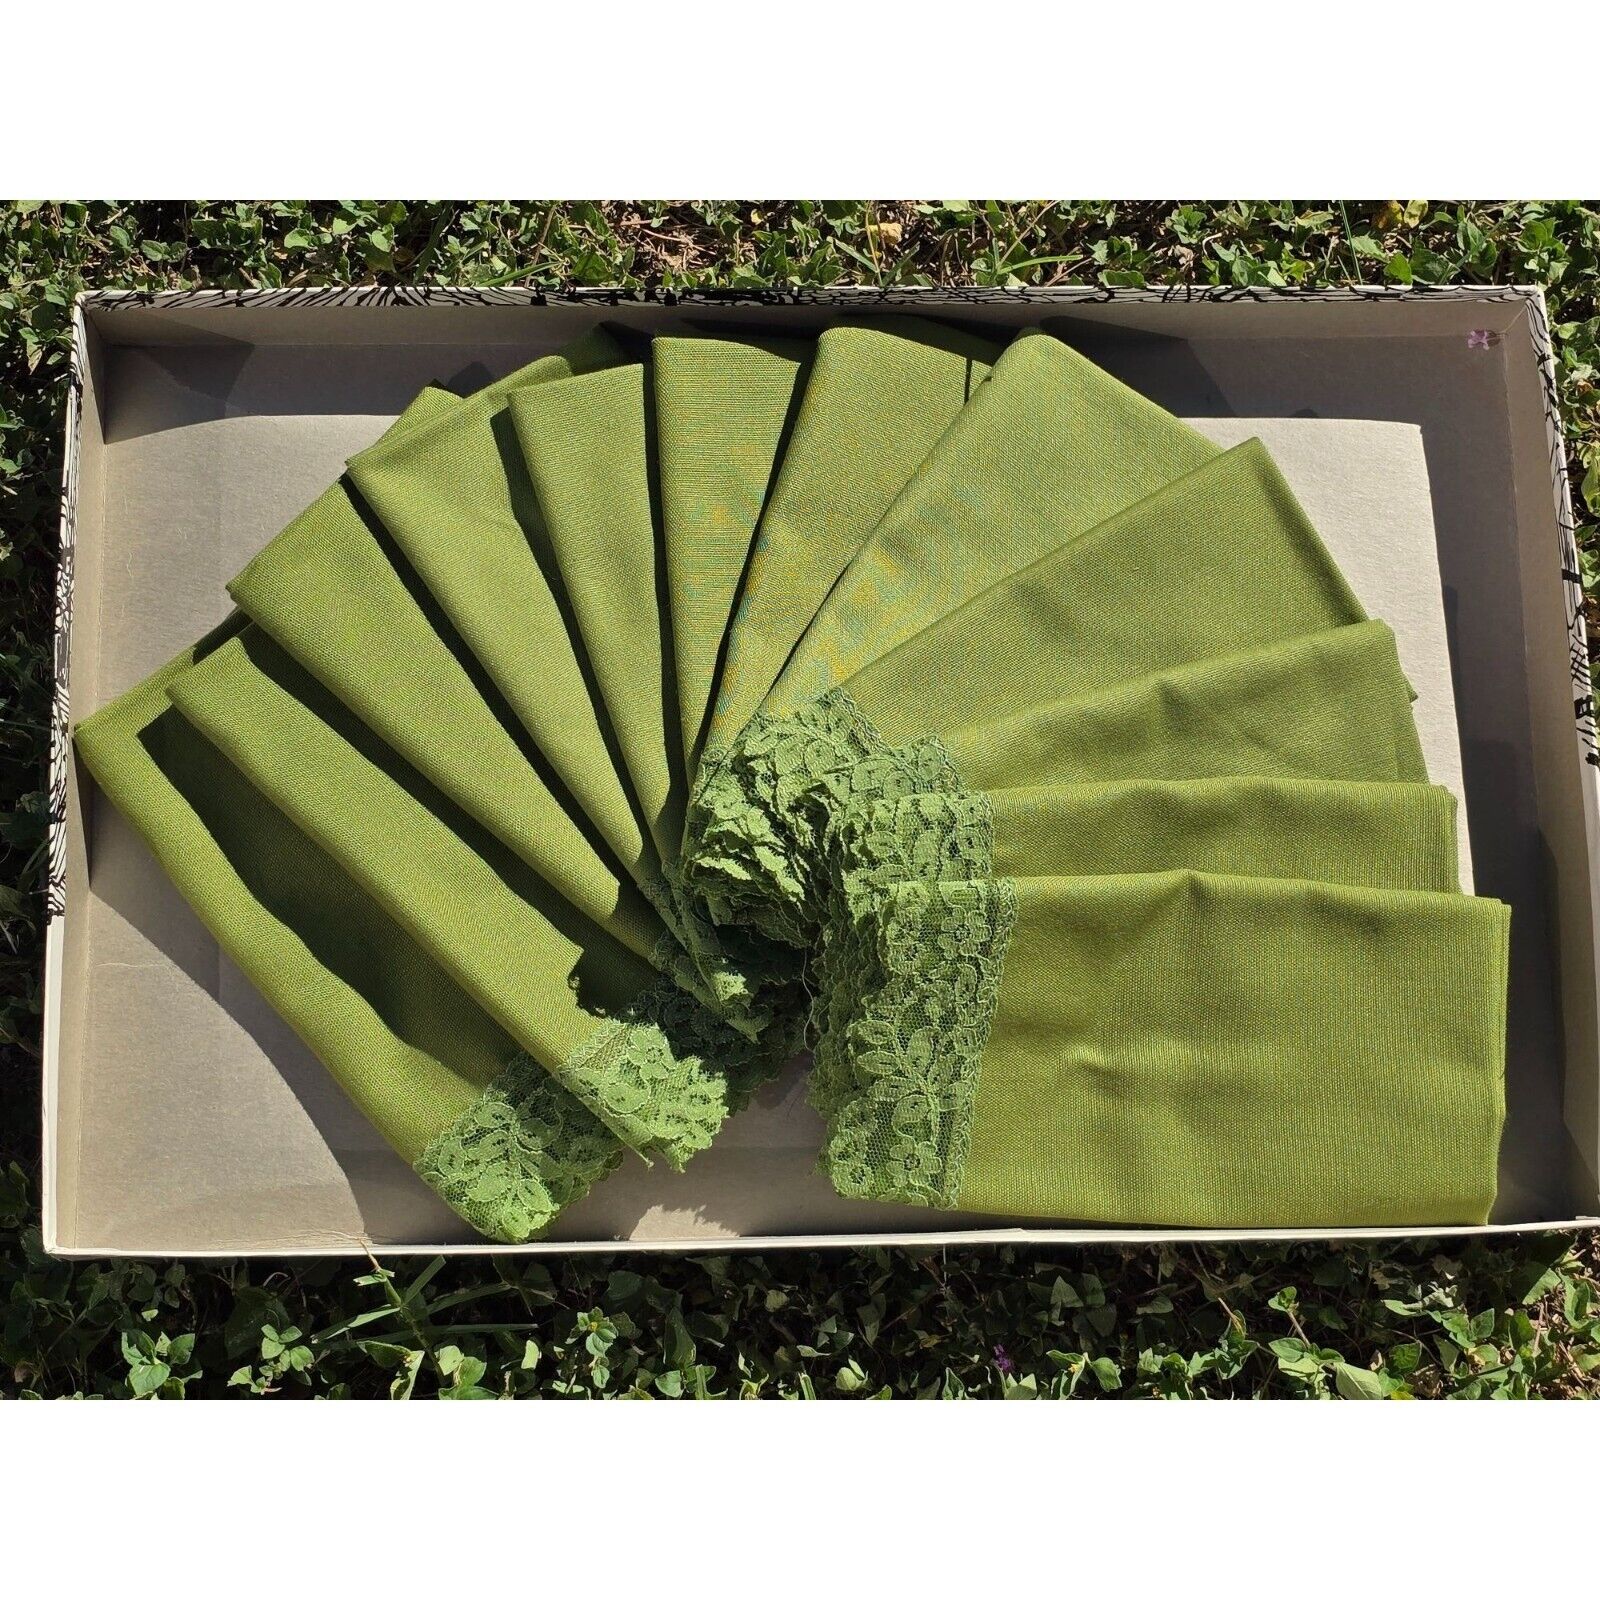 Vintage 1970s Green Linen Napkins With Lace Trimmed Edge Set Of 12